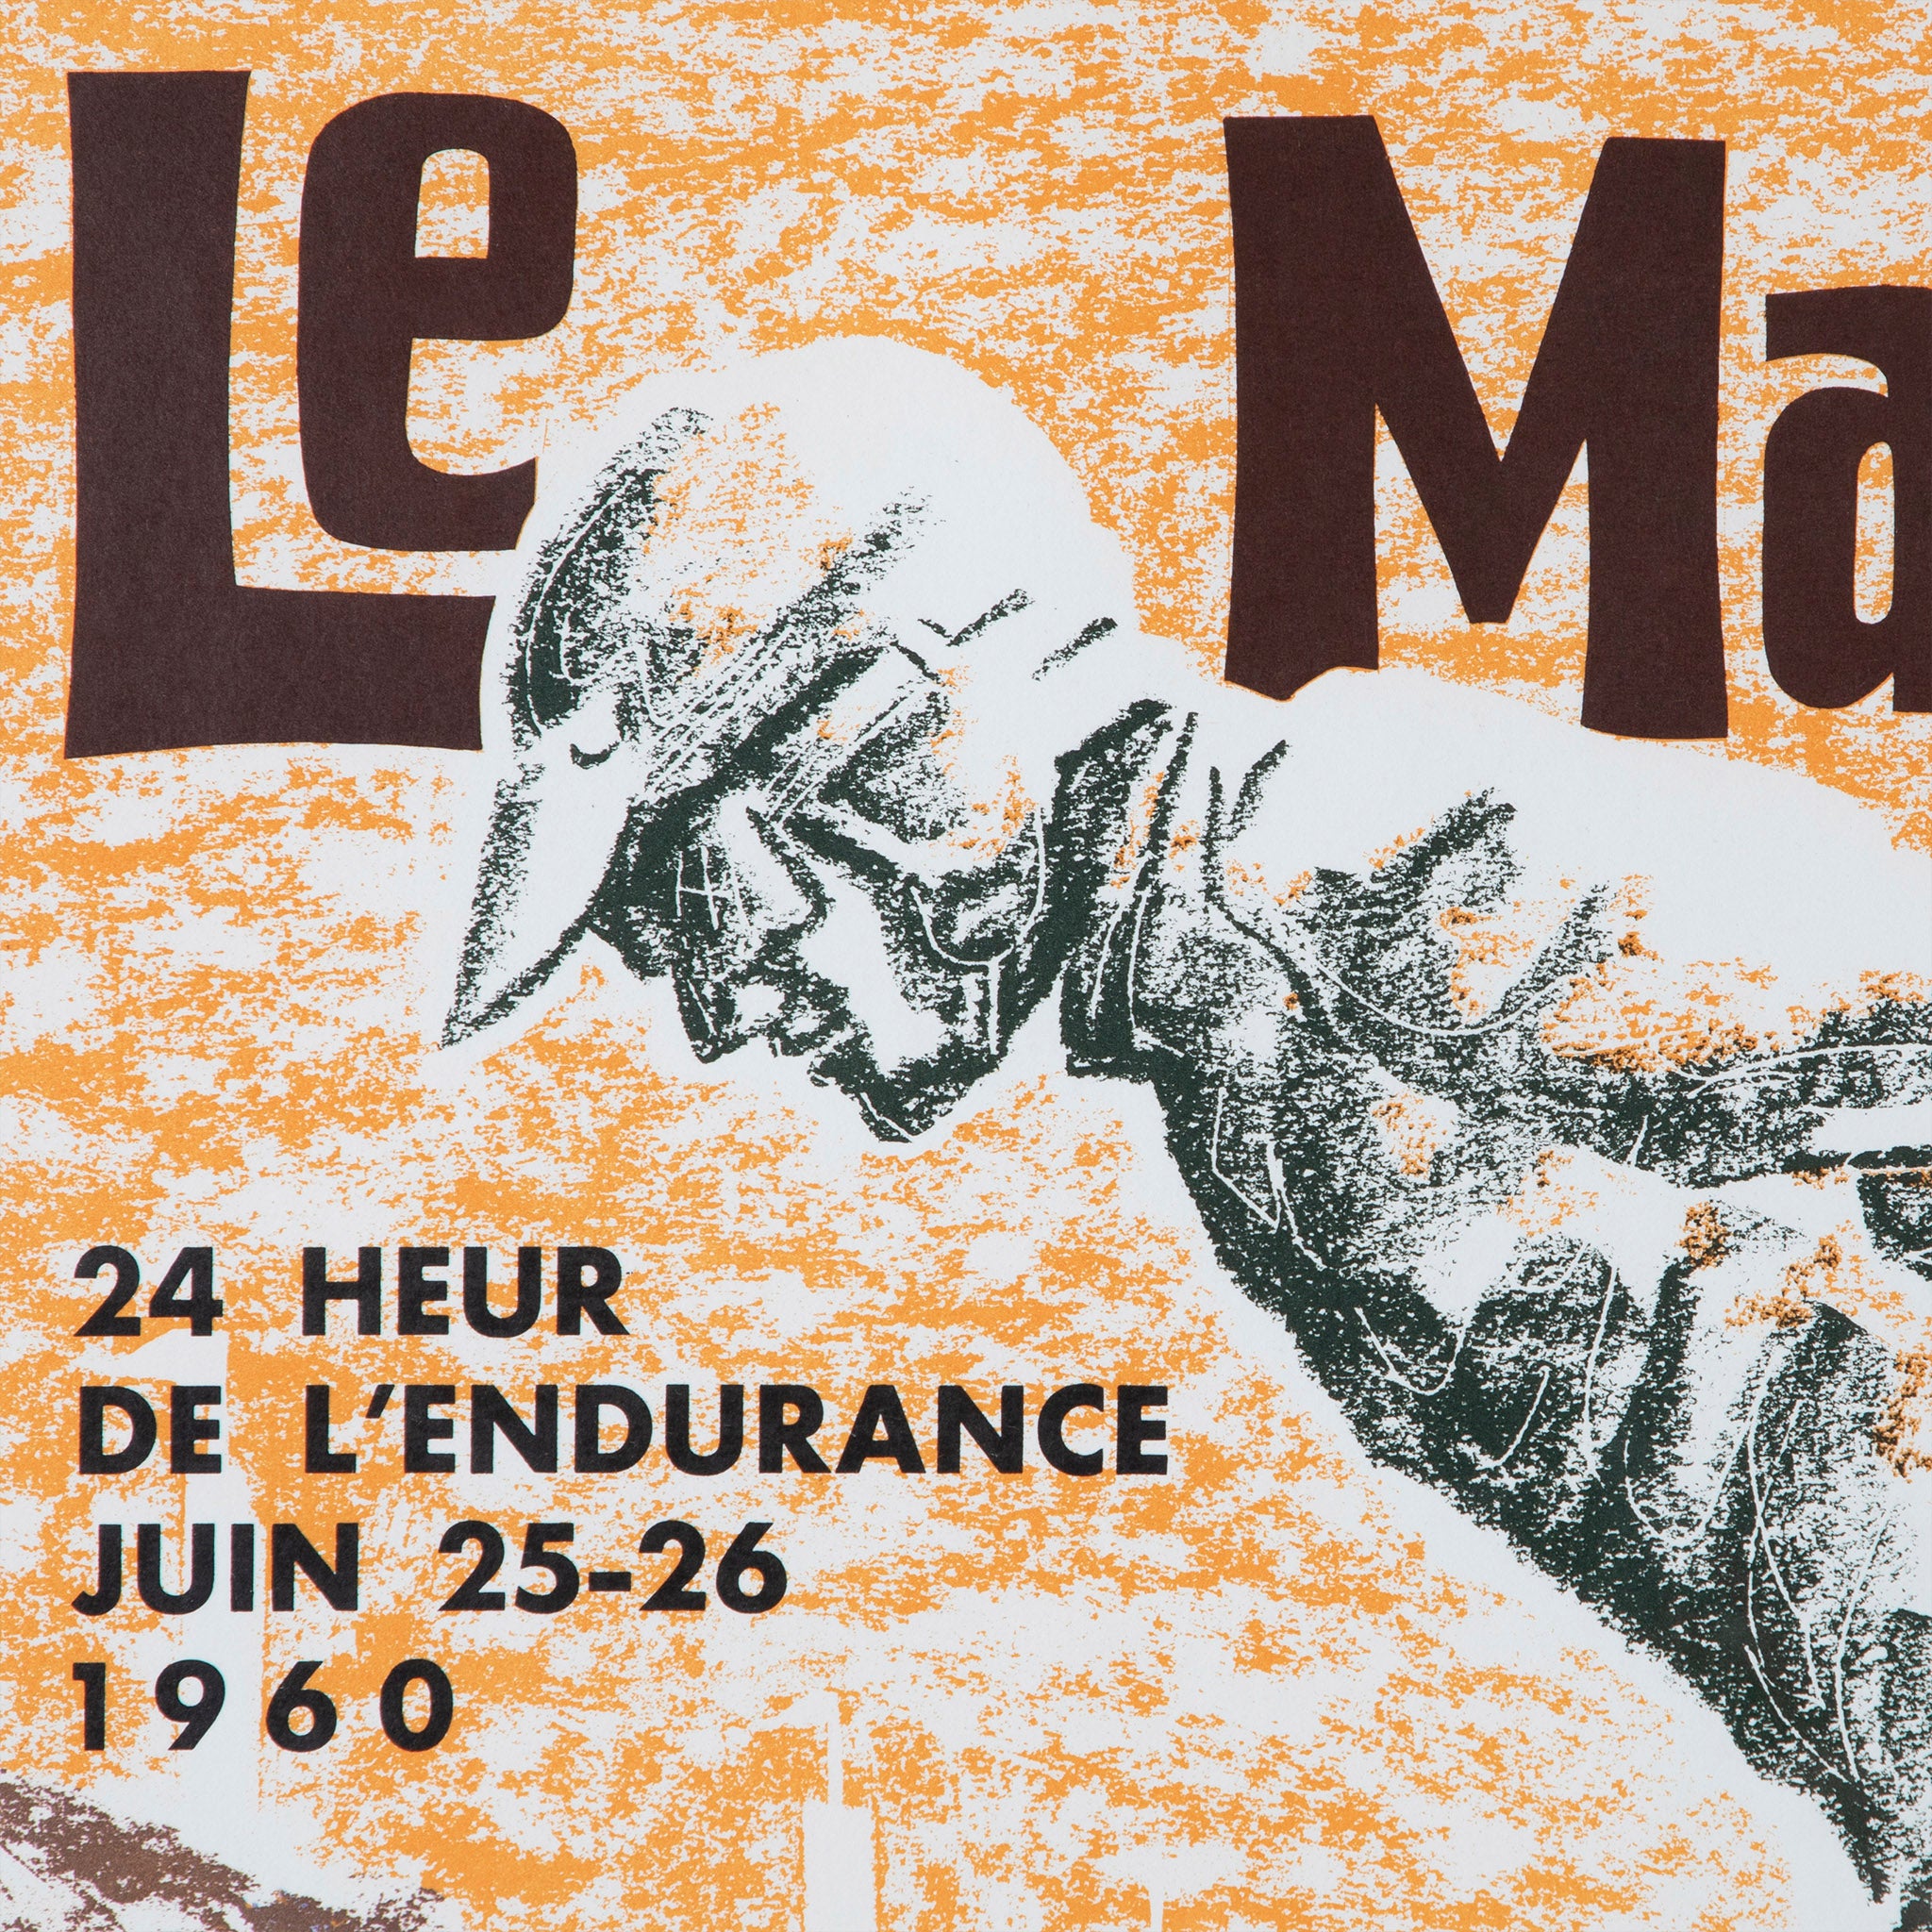 Le Mans French Auto Racing Poster 1960s